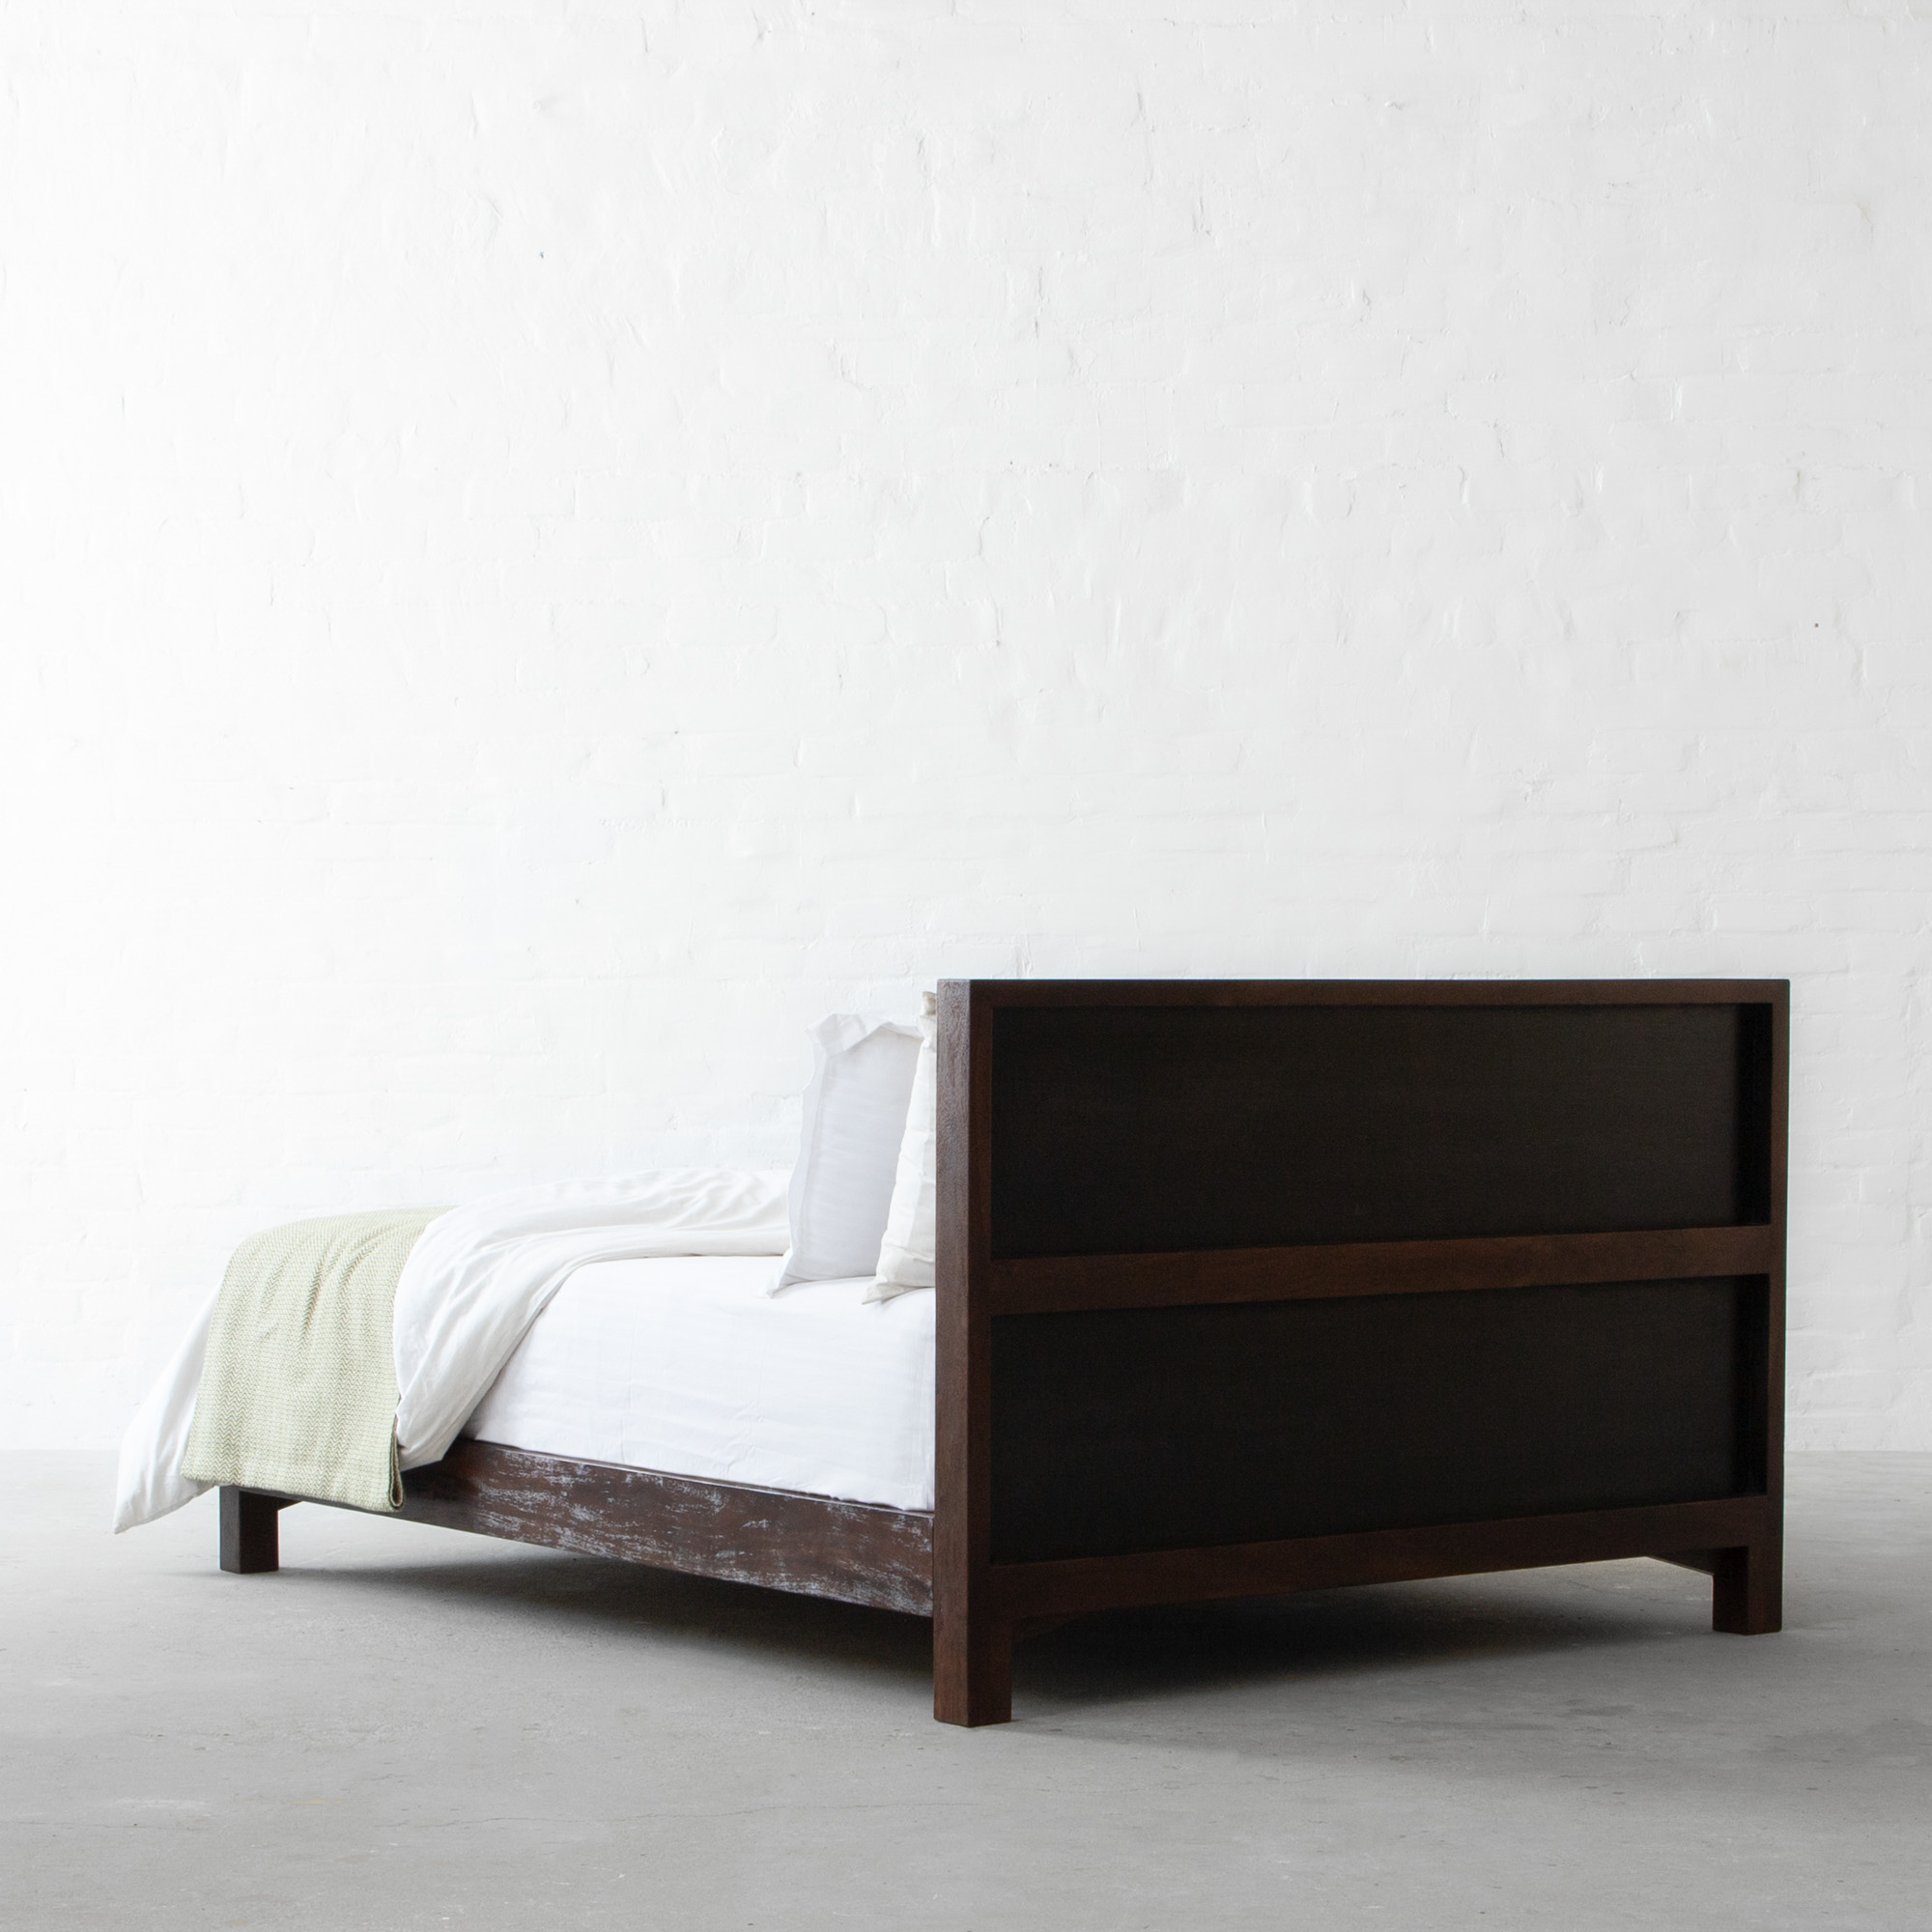 Monroe Bed King Size